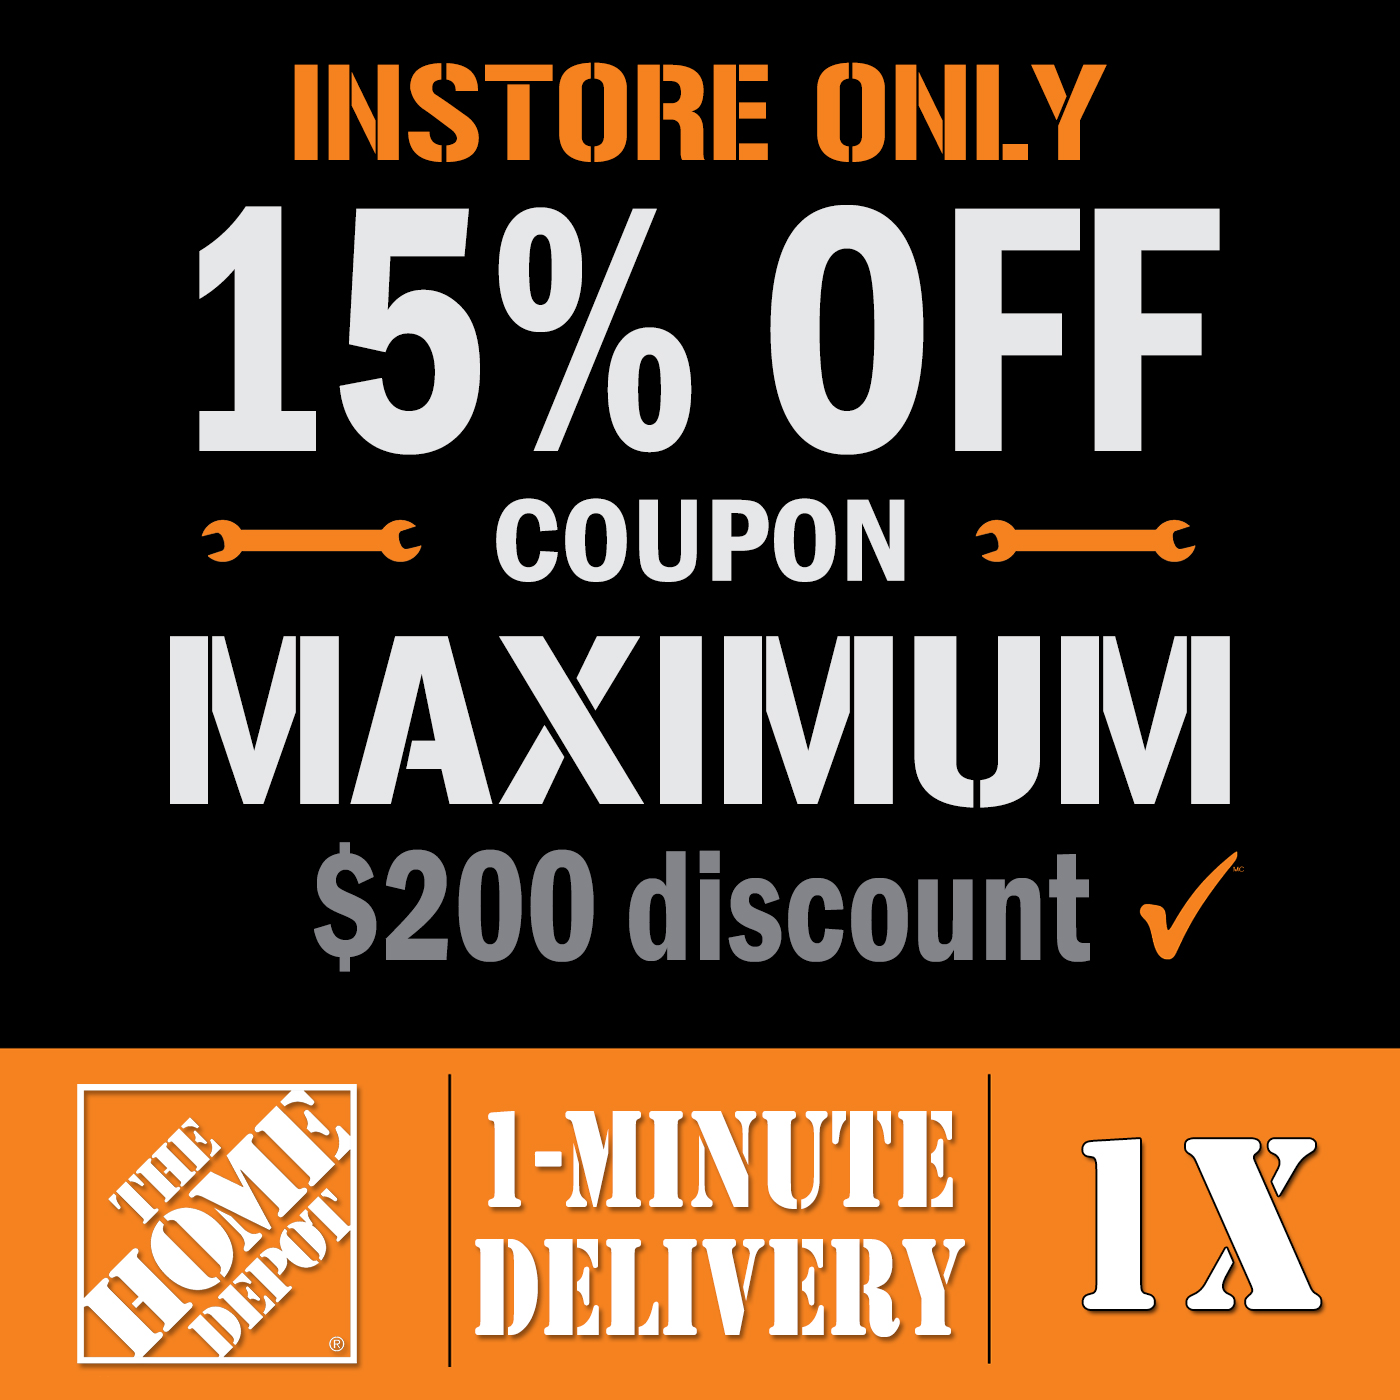 ONE Home Depot 15% OFF Discount Card Instore Purchase ONLY Expires 9/9 